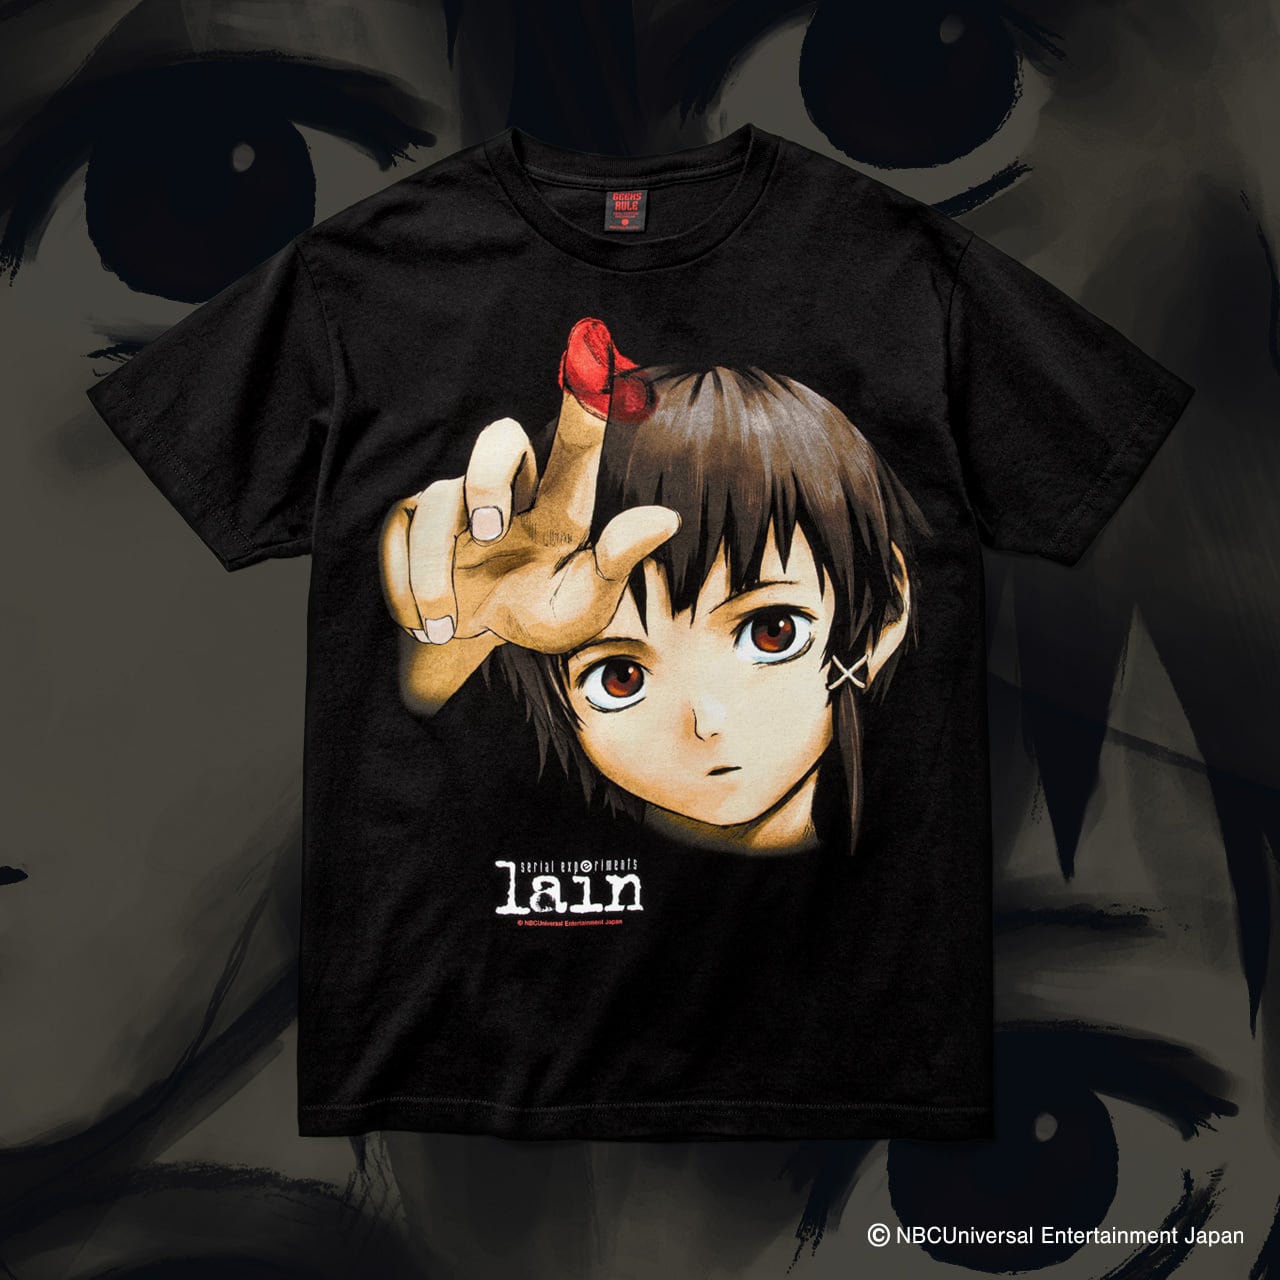 GEEKS RULE serial experiments lain Tシャツ安倍吉俊